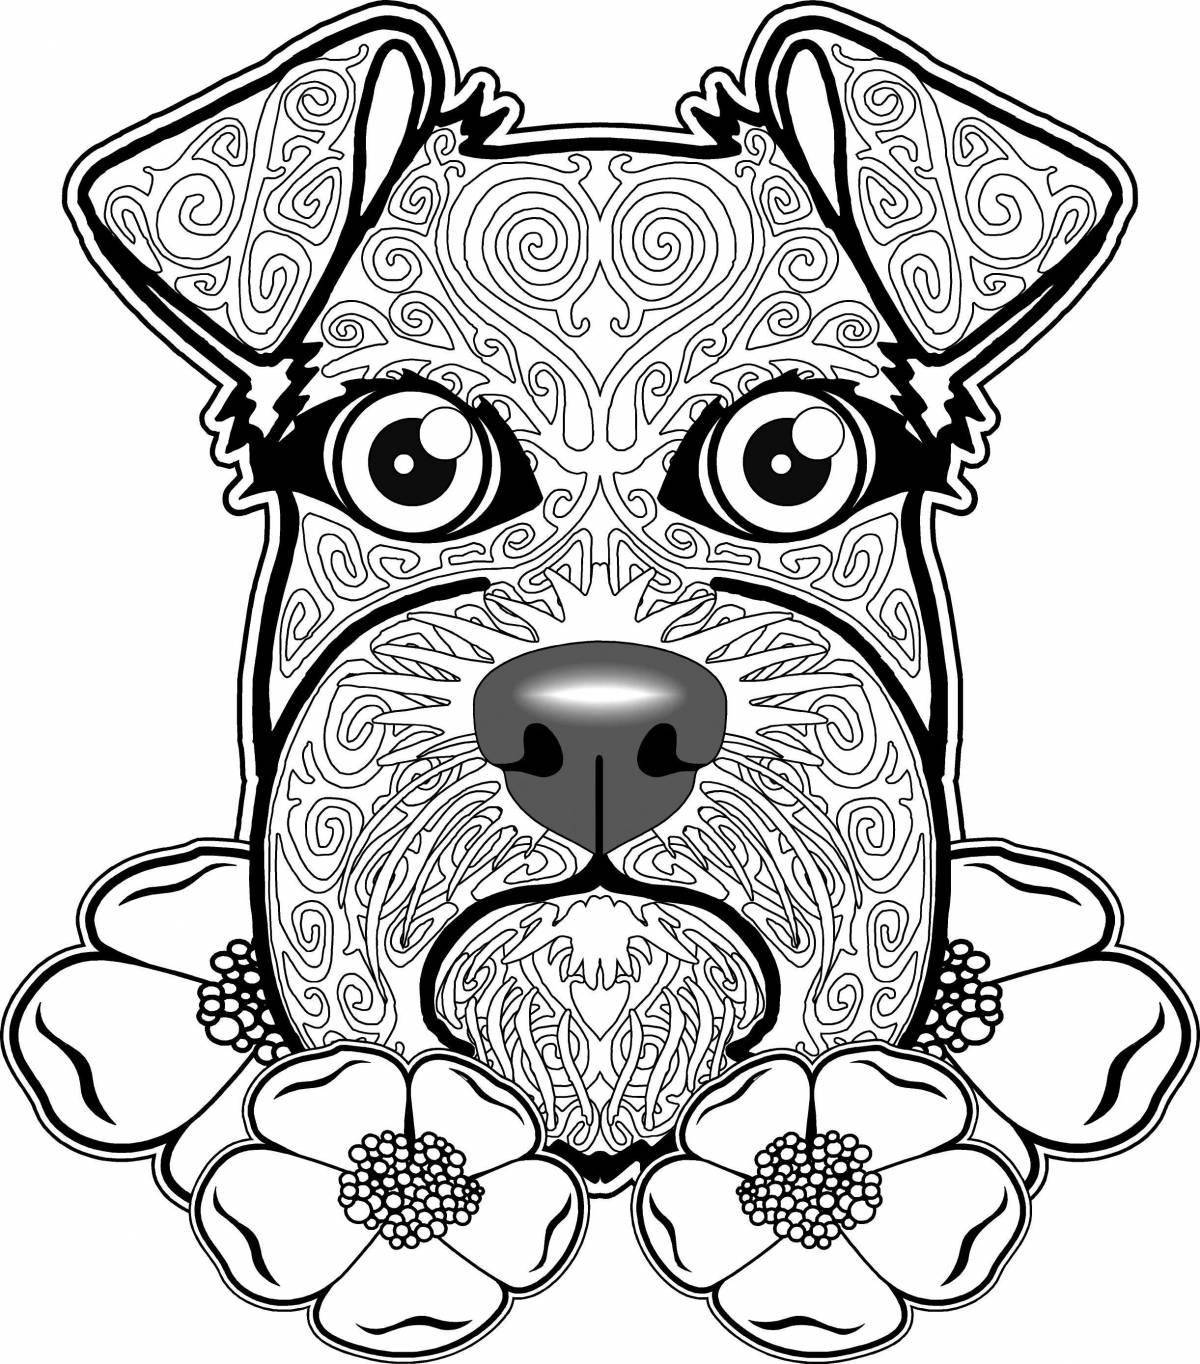 Coloring book soothing dog antistress